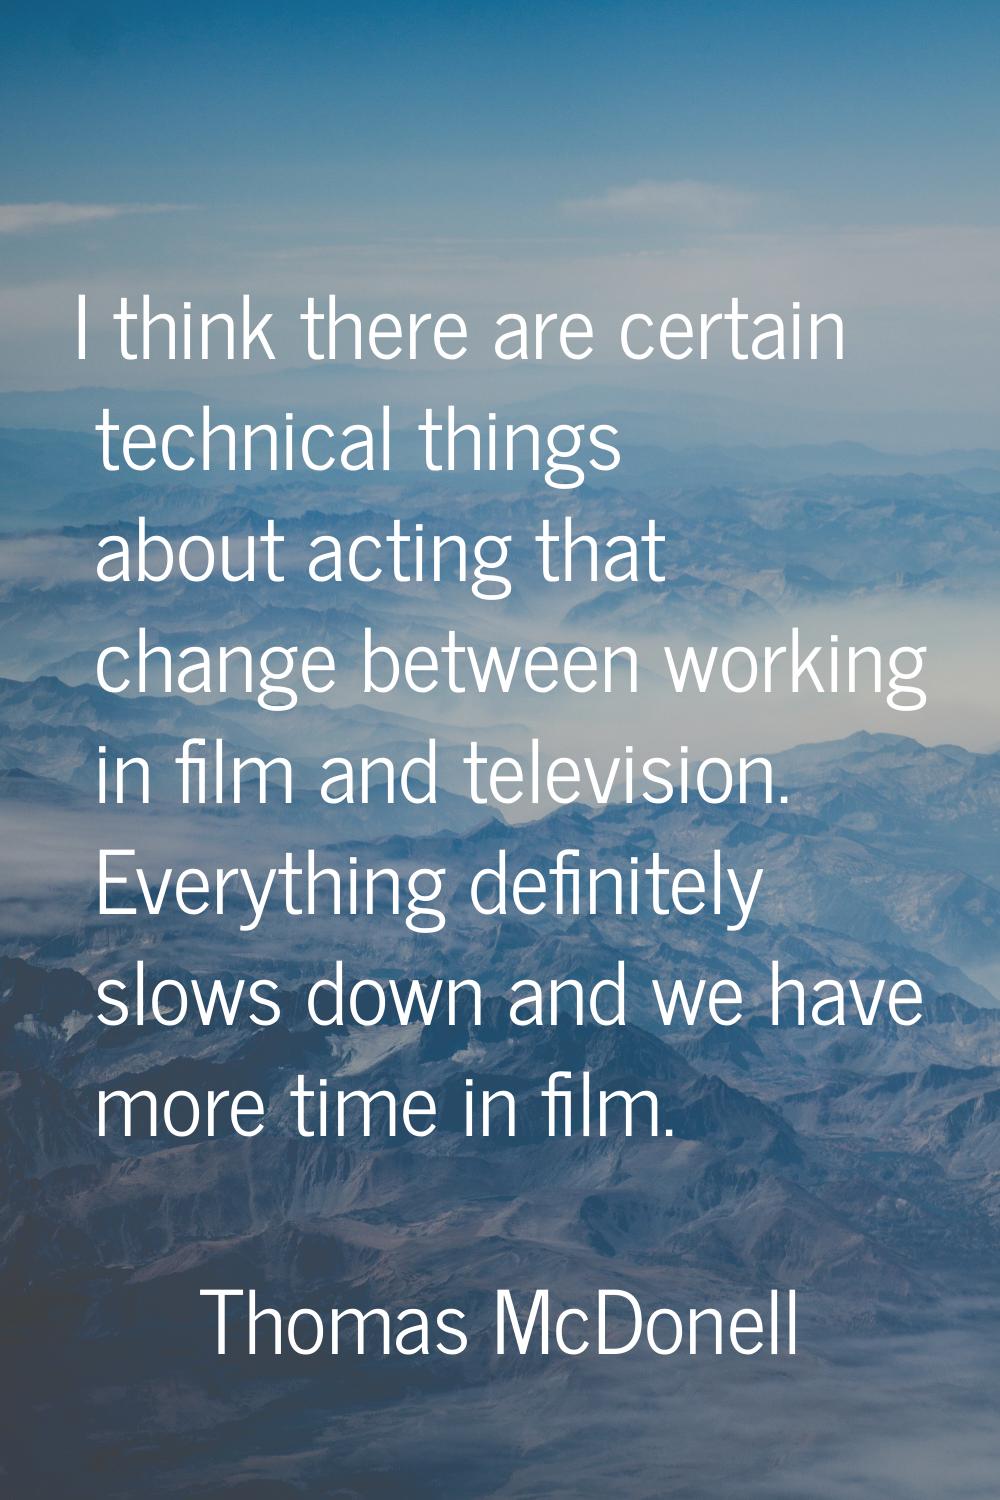 I think there are certain technical things about acting that change between working in film and tel